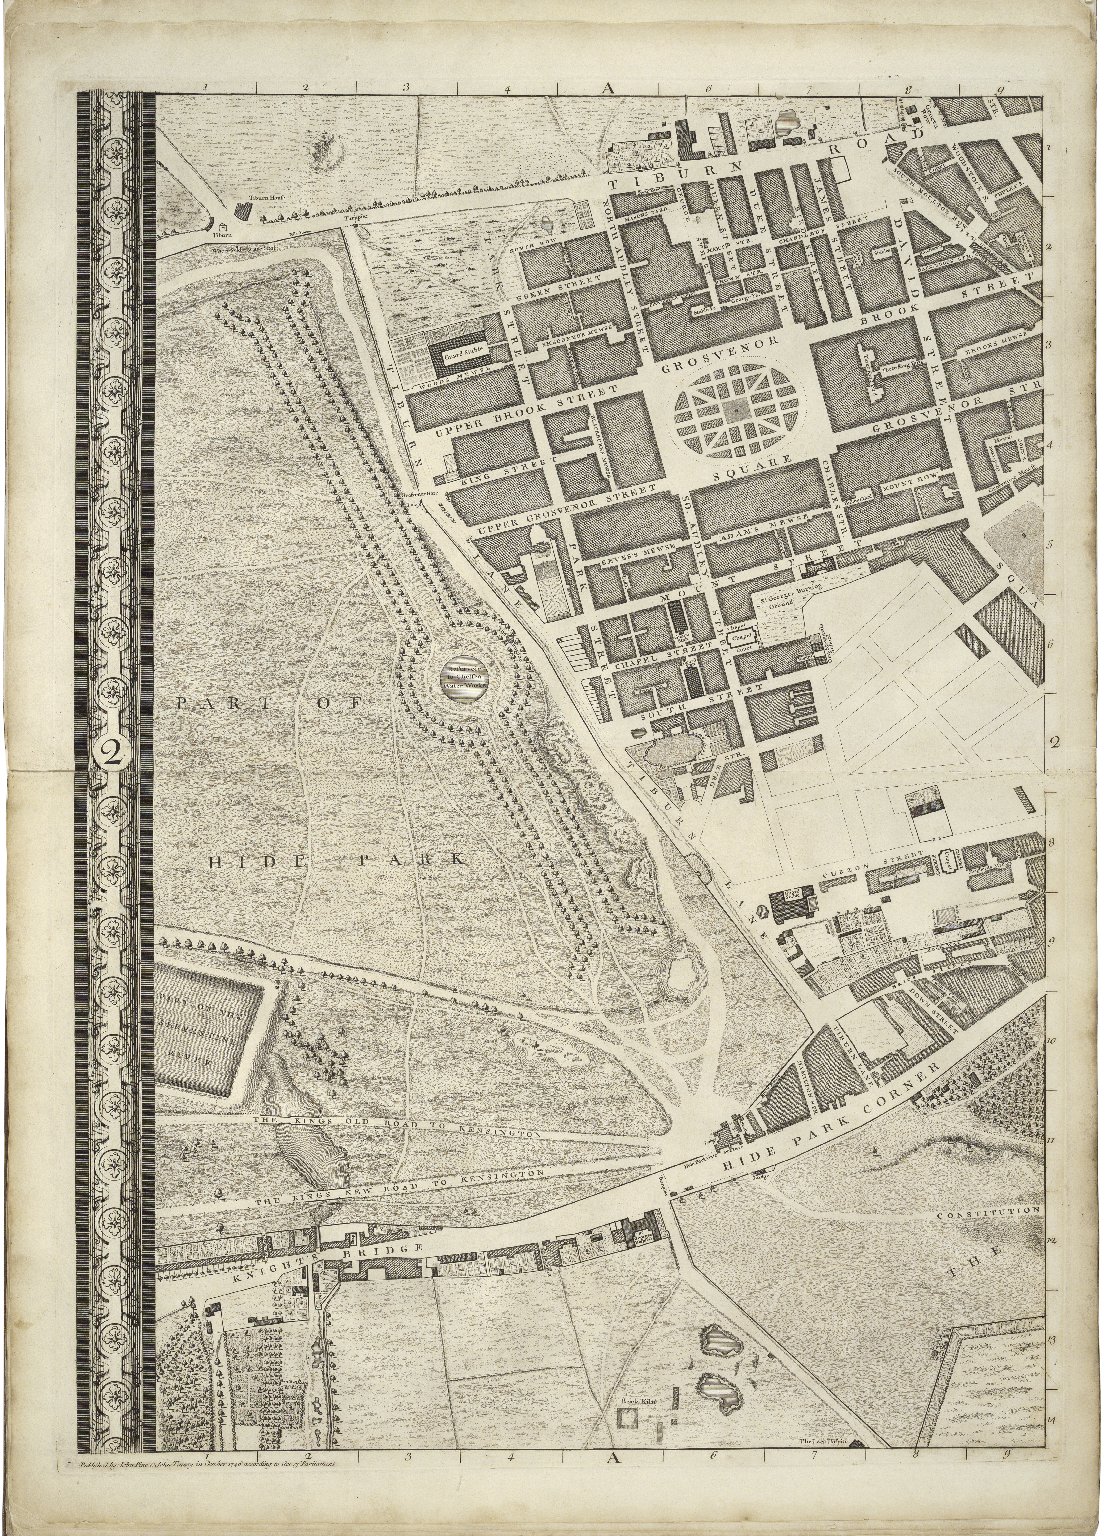 Plate A2 of the 1746 Rocque map. Image courtesy of LUNA at the Folger Shakespeare Library.